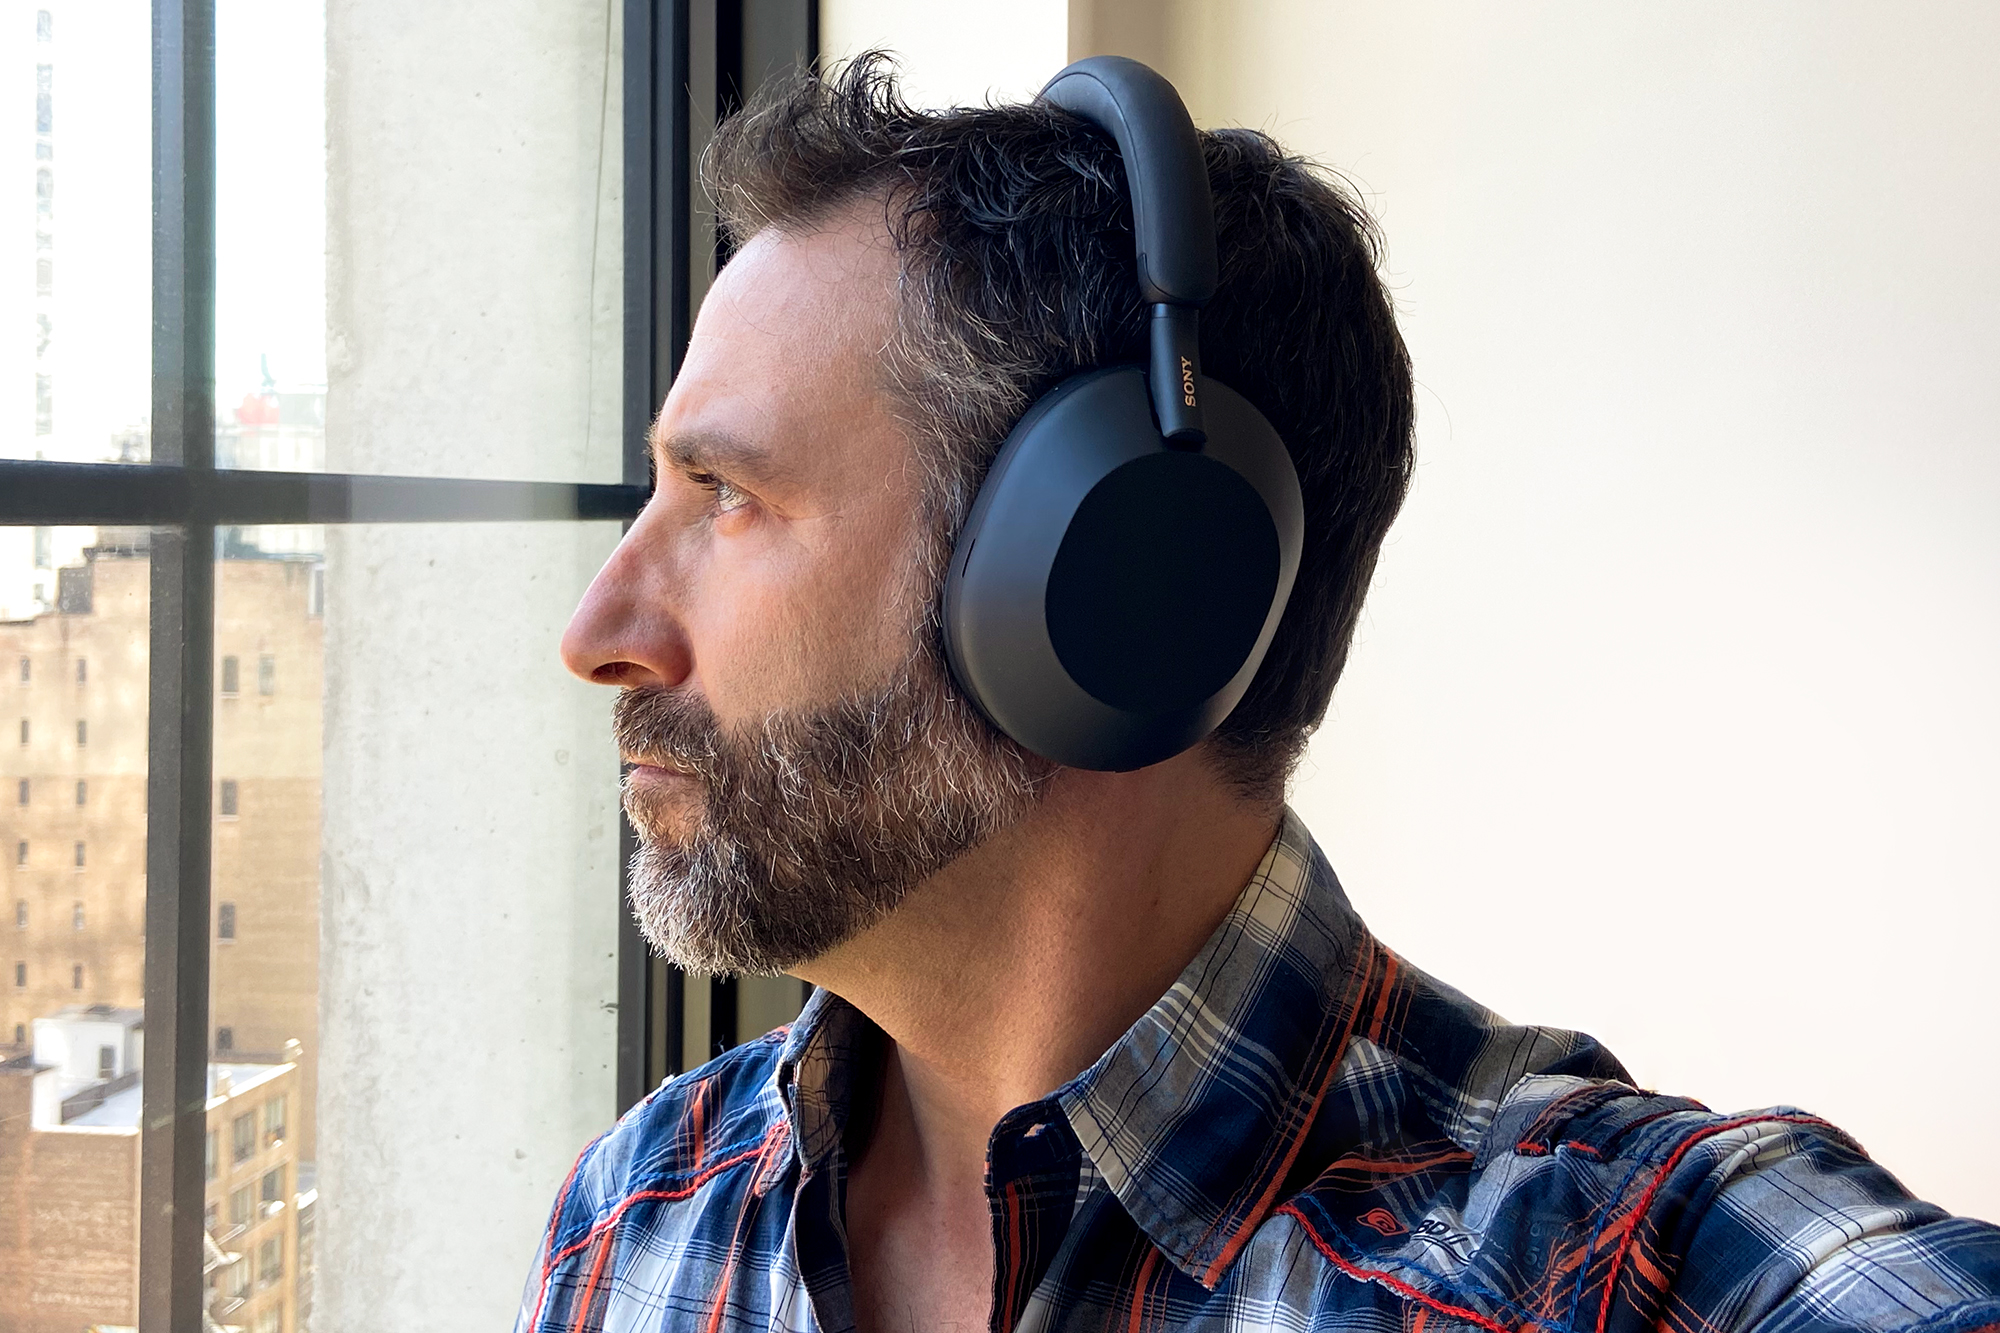 These $99 Sony headphones are almost as good as the XM5 for less than half  the price